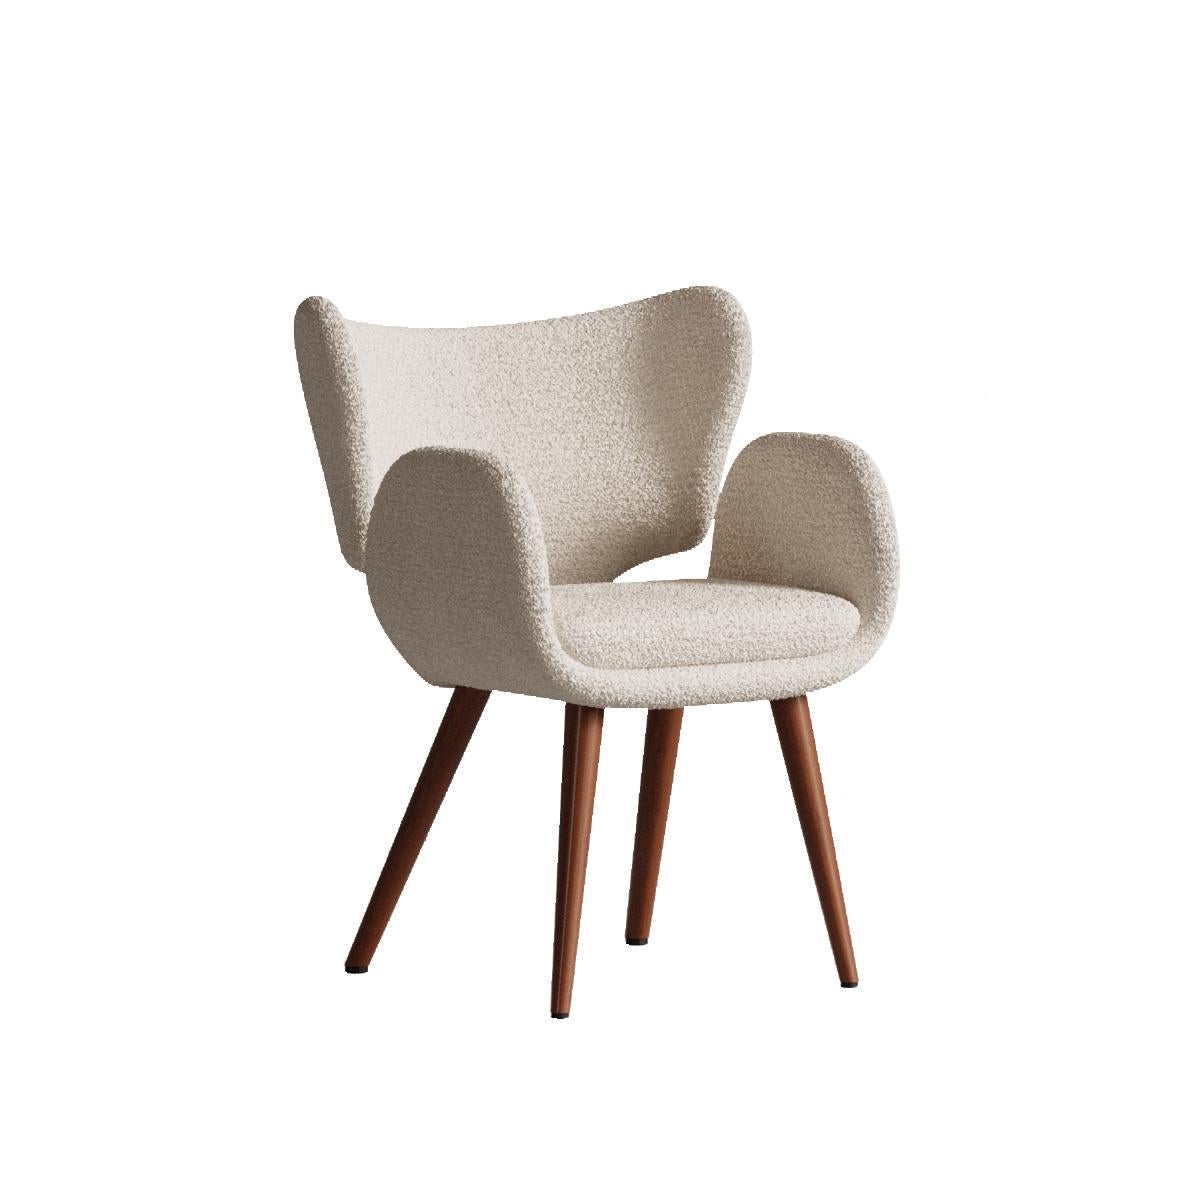 Post-Modern Beige Madina Chair by Plyus Design For Sale